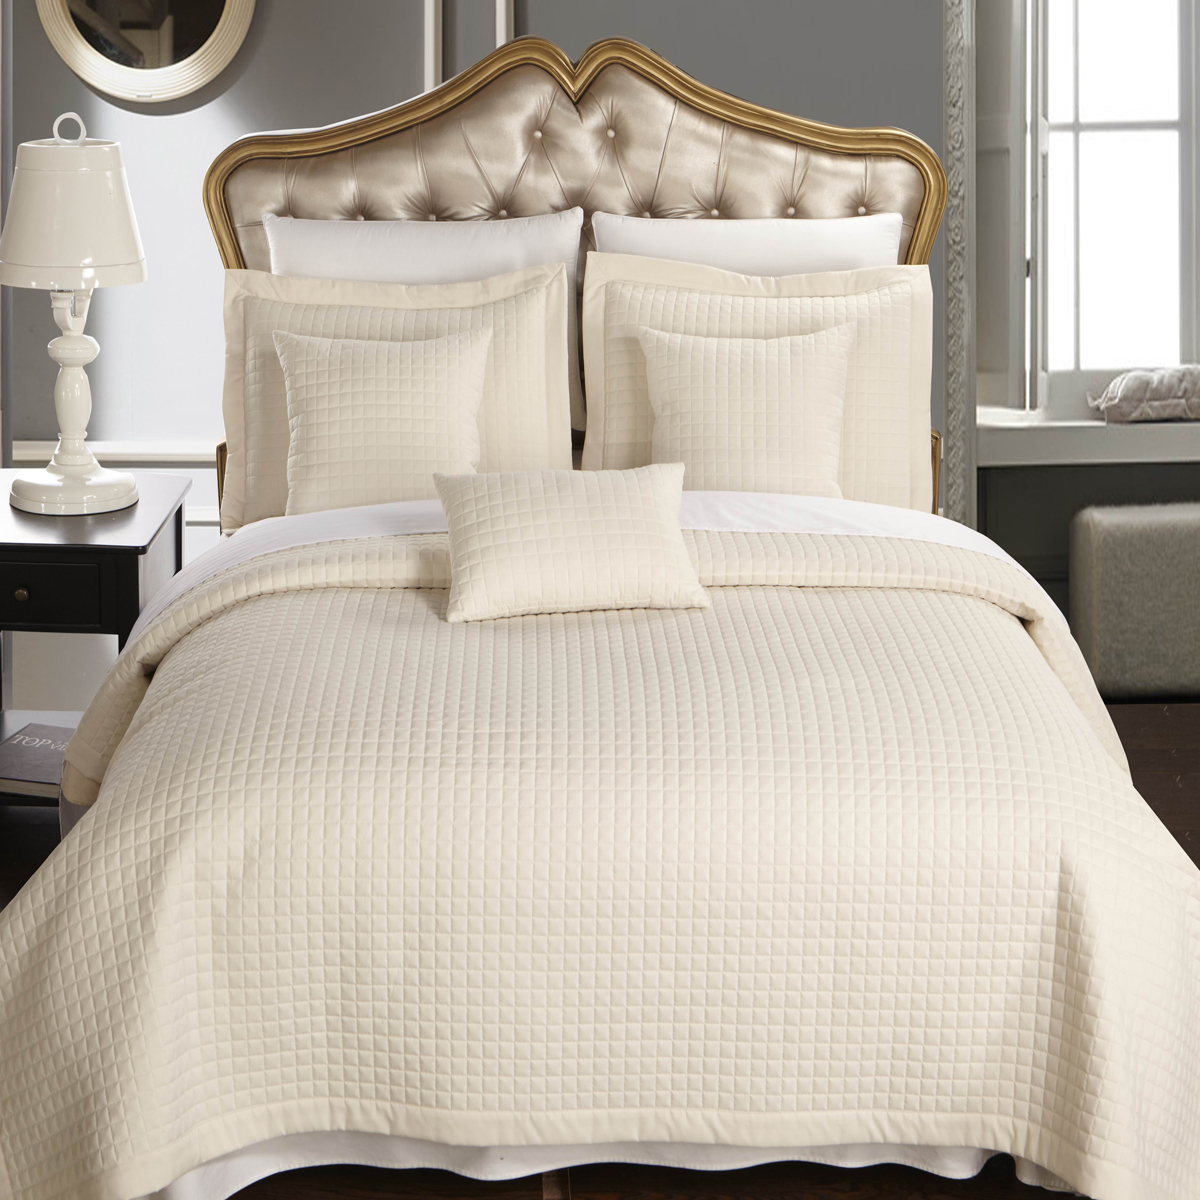 GoLinens Luxury Ivory Checkered Quilted Wrinkle Free 6 Piece Coverlets Set [Coverlet, Shams + Decorative Pillows]